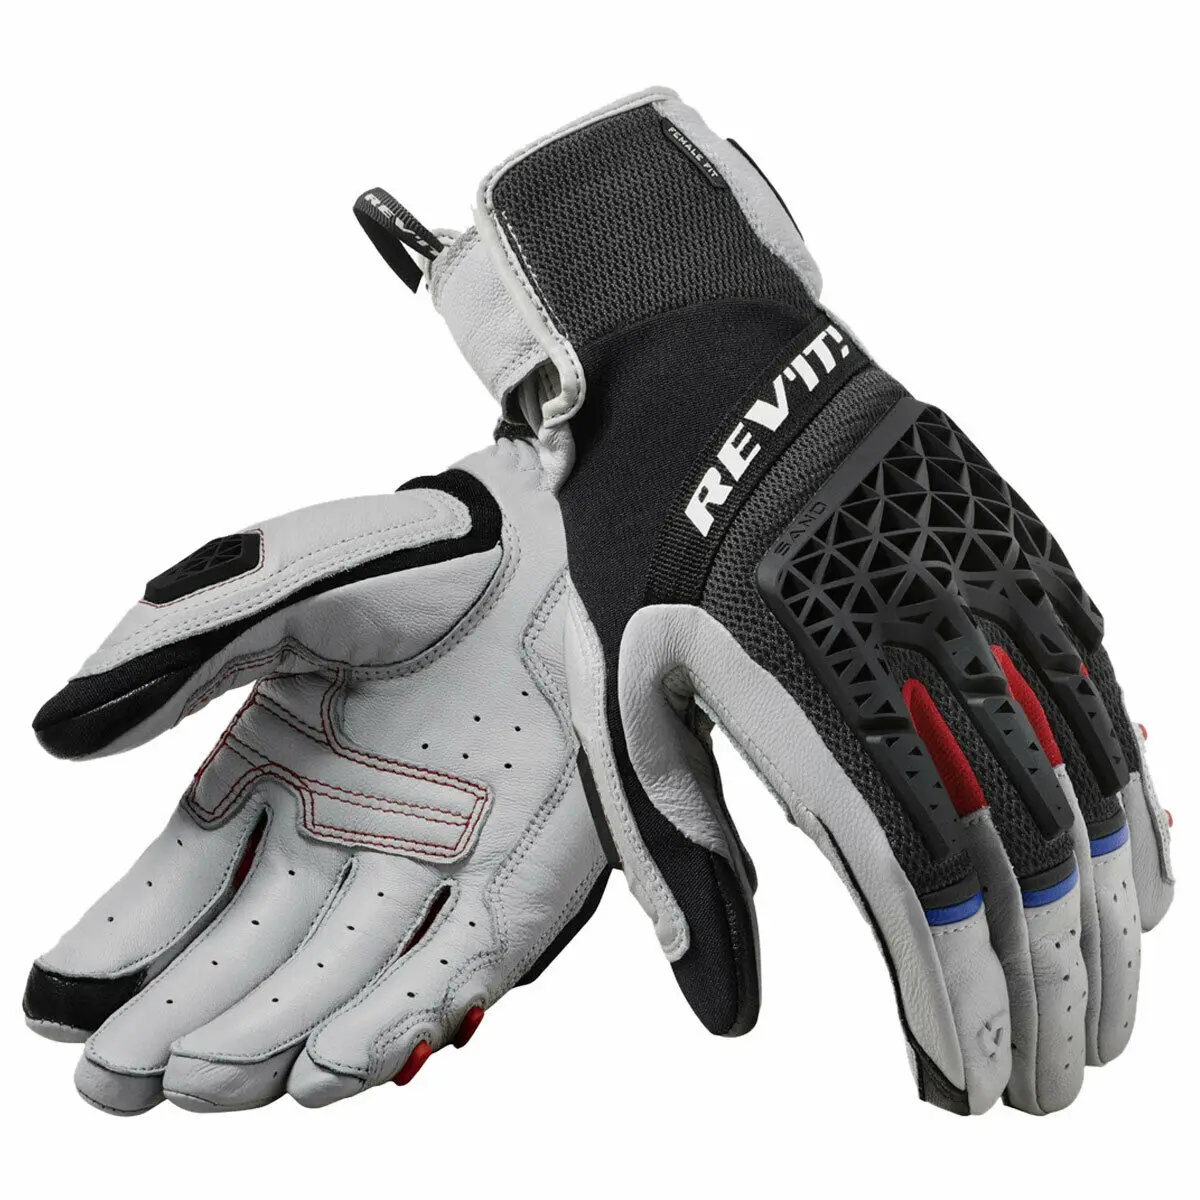 Black/Gray Revit Sand 4 Men's Motorcycle Mesh Riding Textile Genuine Leather Motorbike Racing Touch Screen Gloves Sizes M-XXL